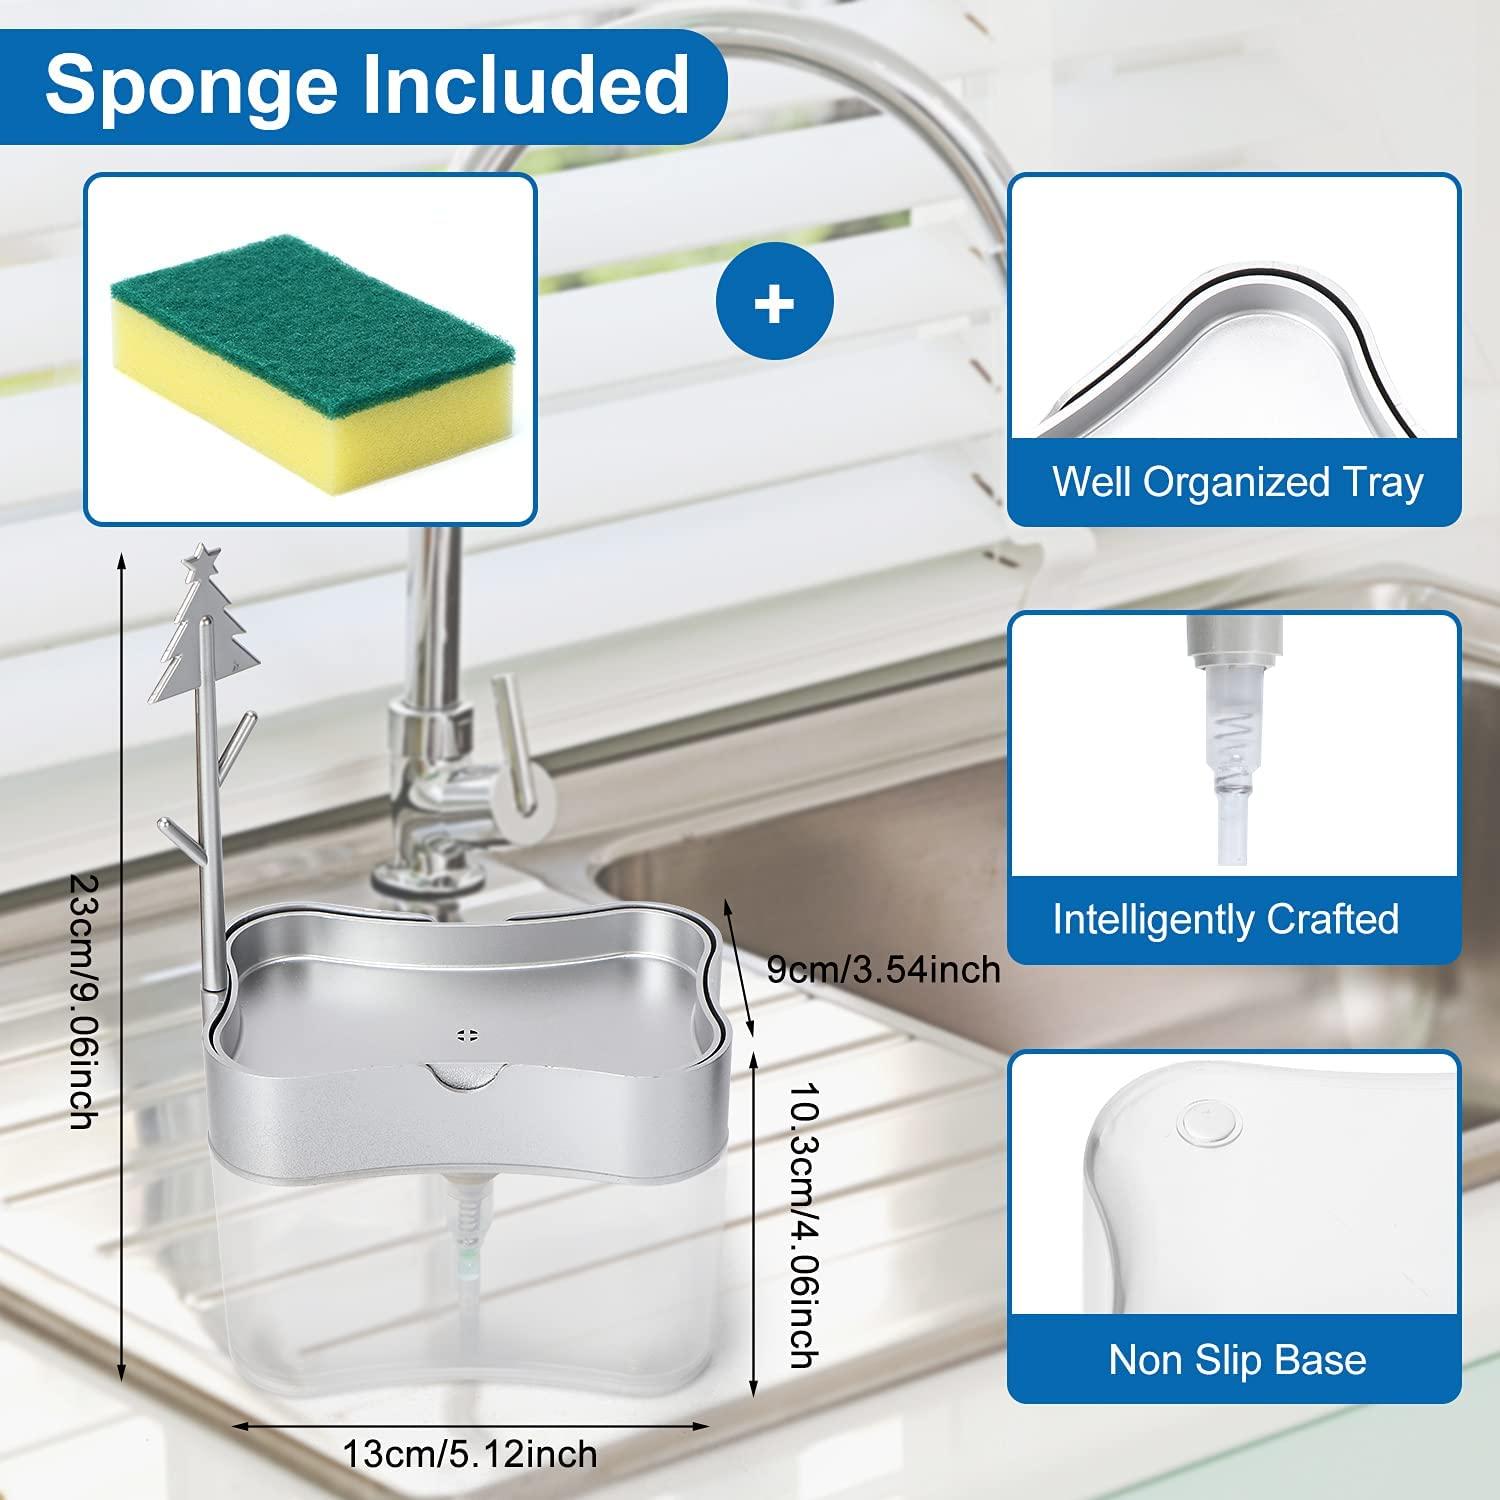 SOAP DISPENSING DISH SPONGE – Things are Cooking